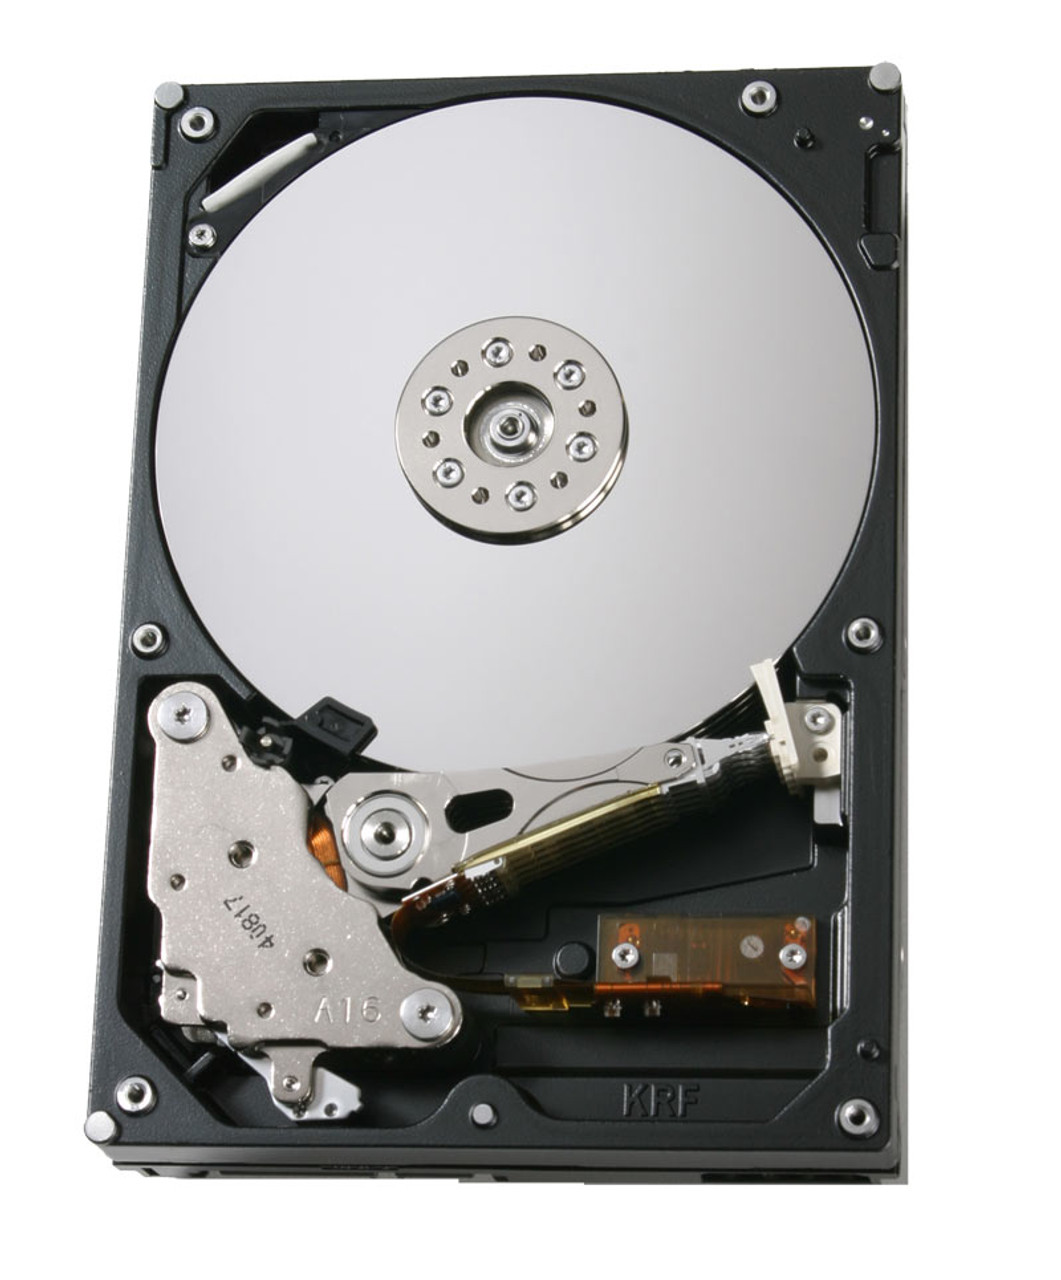 【パーツ】3.5 SATA 3TB 1台 正常 Hitachi HDS723030ALA640 使用時間71188H ■HDD1481